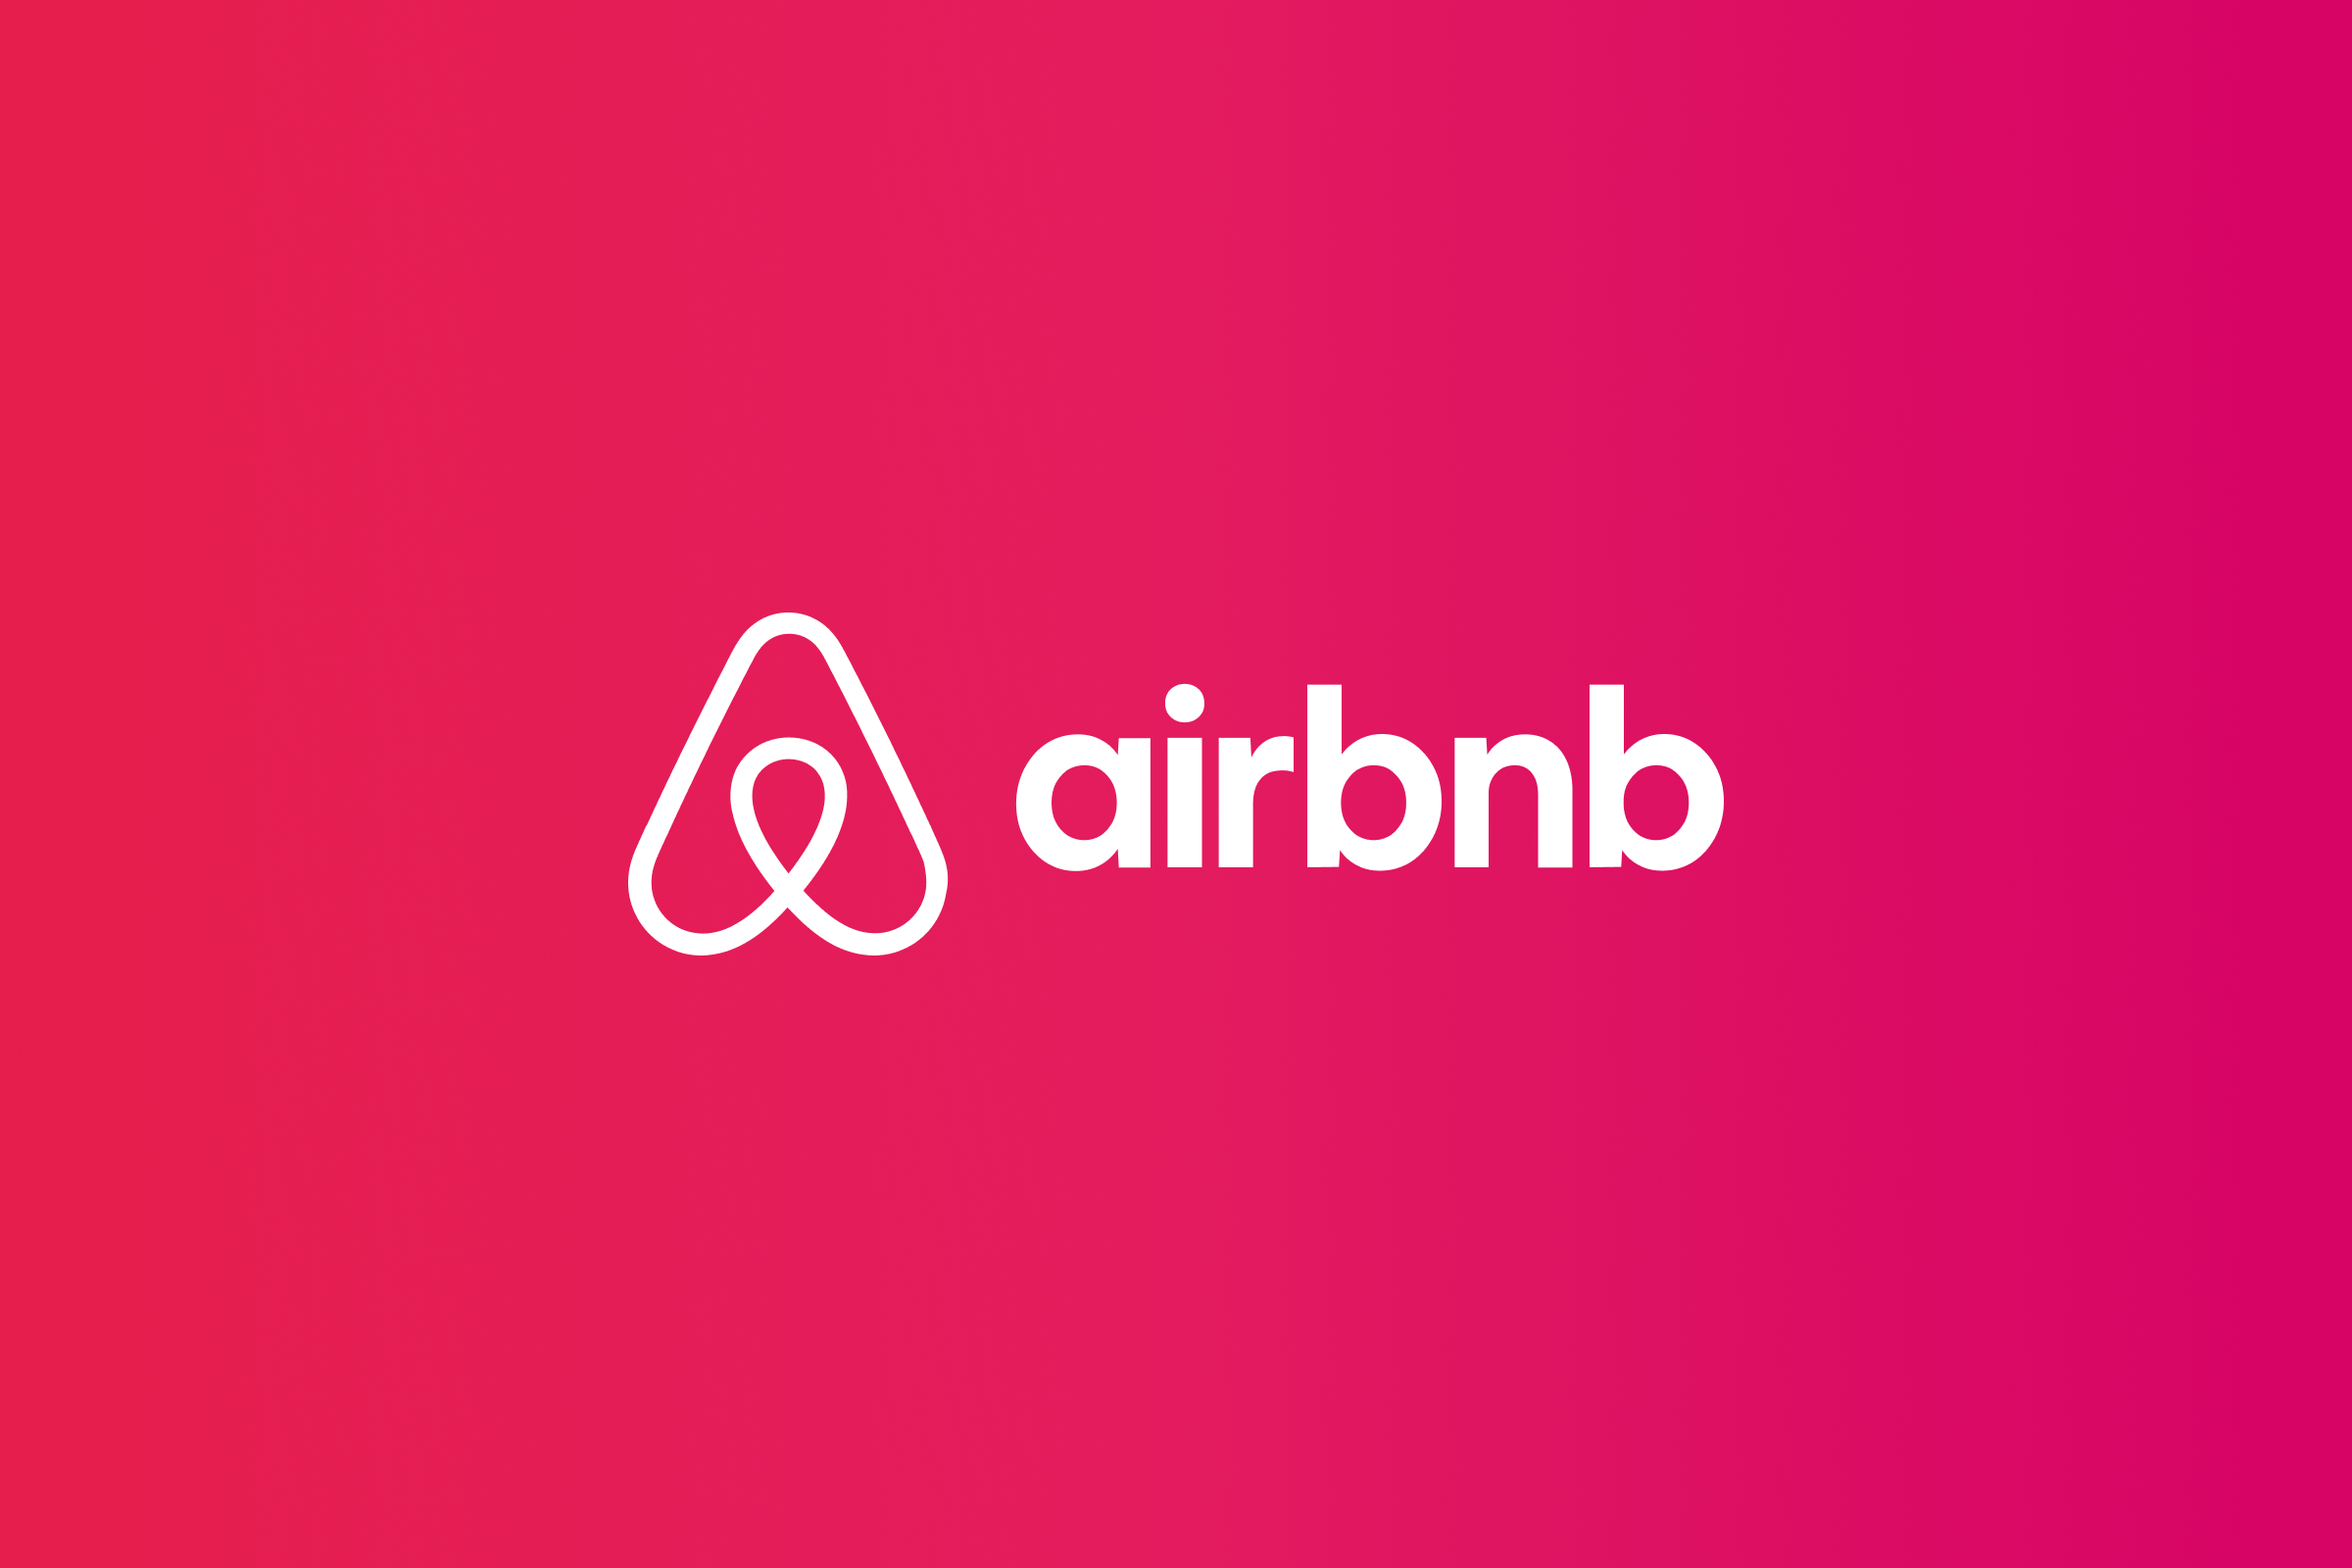 airbnb logo from their media assets